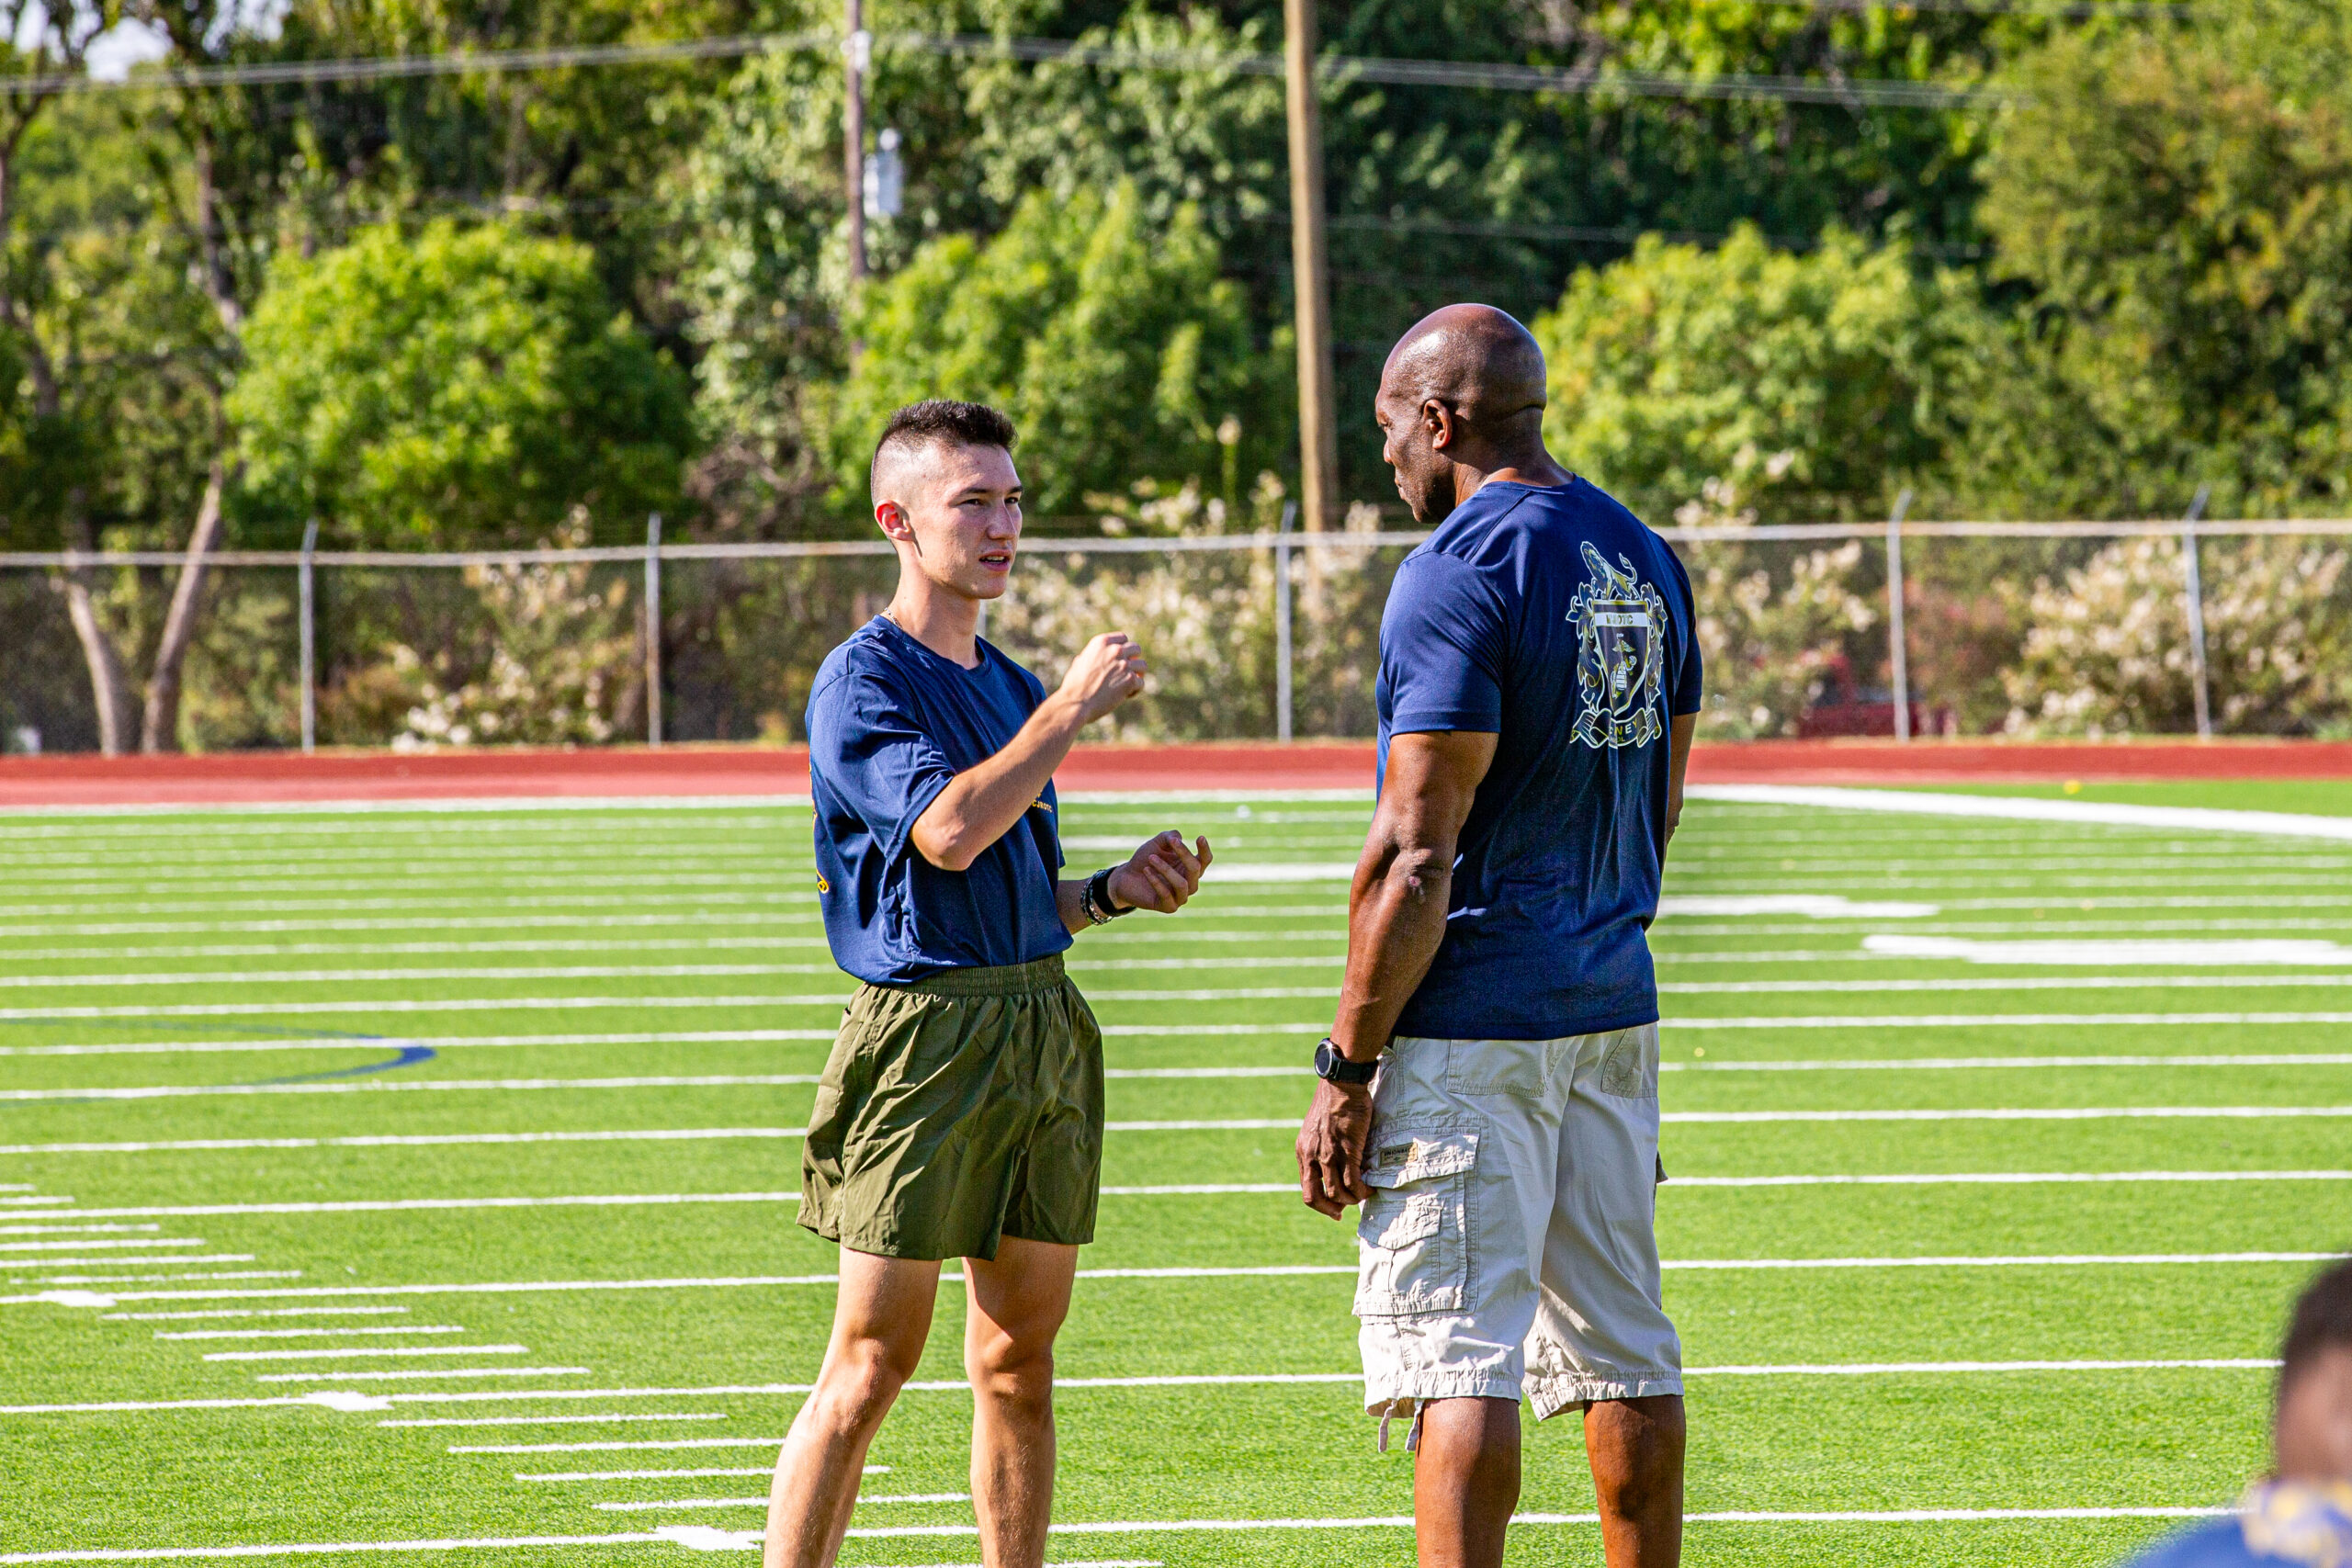 McPhatter and student talking on the football field durning physical fitness training